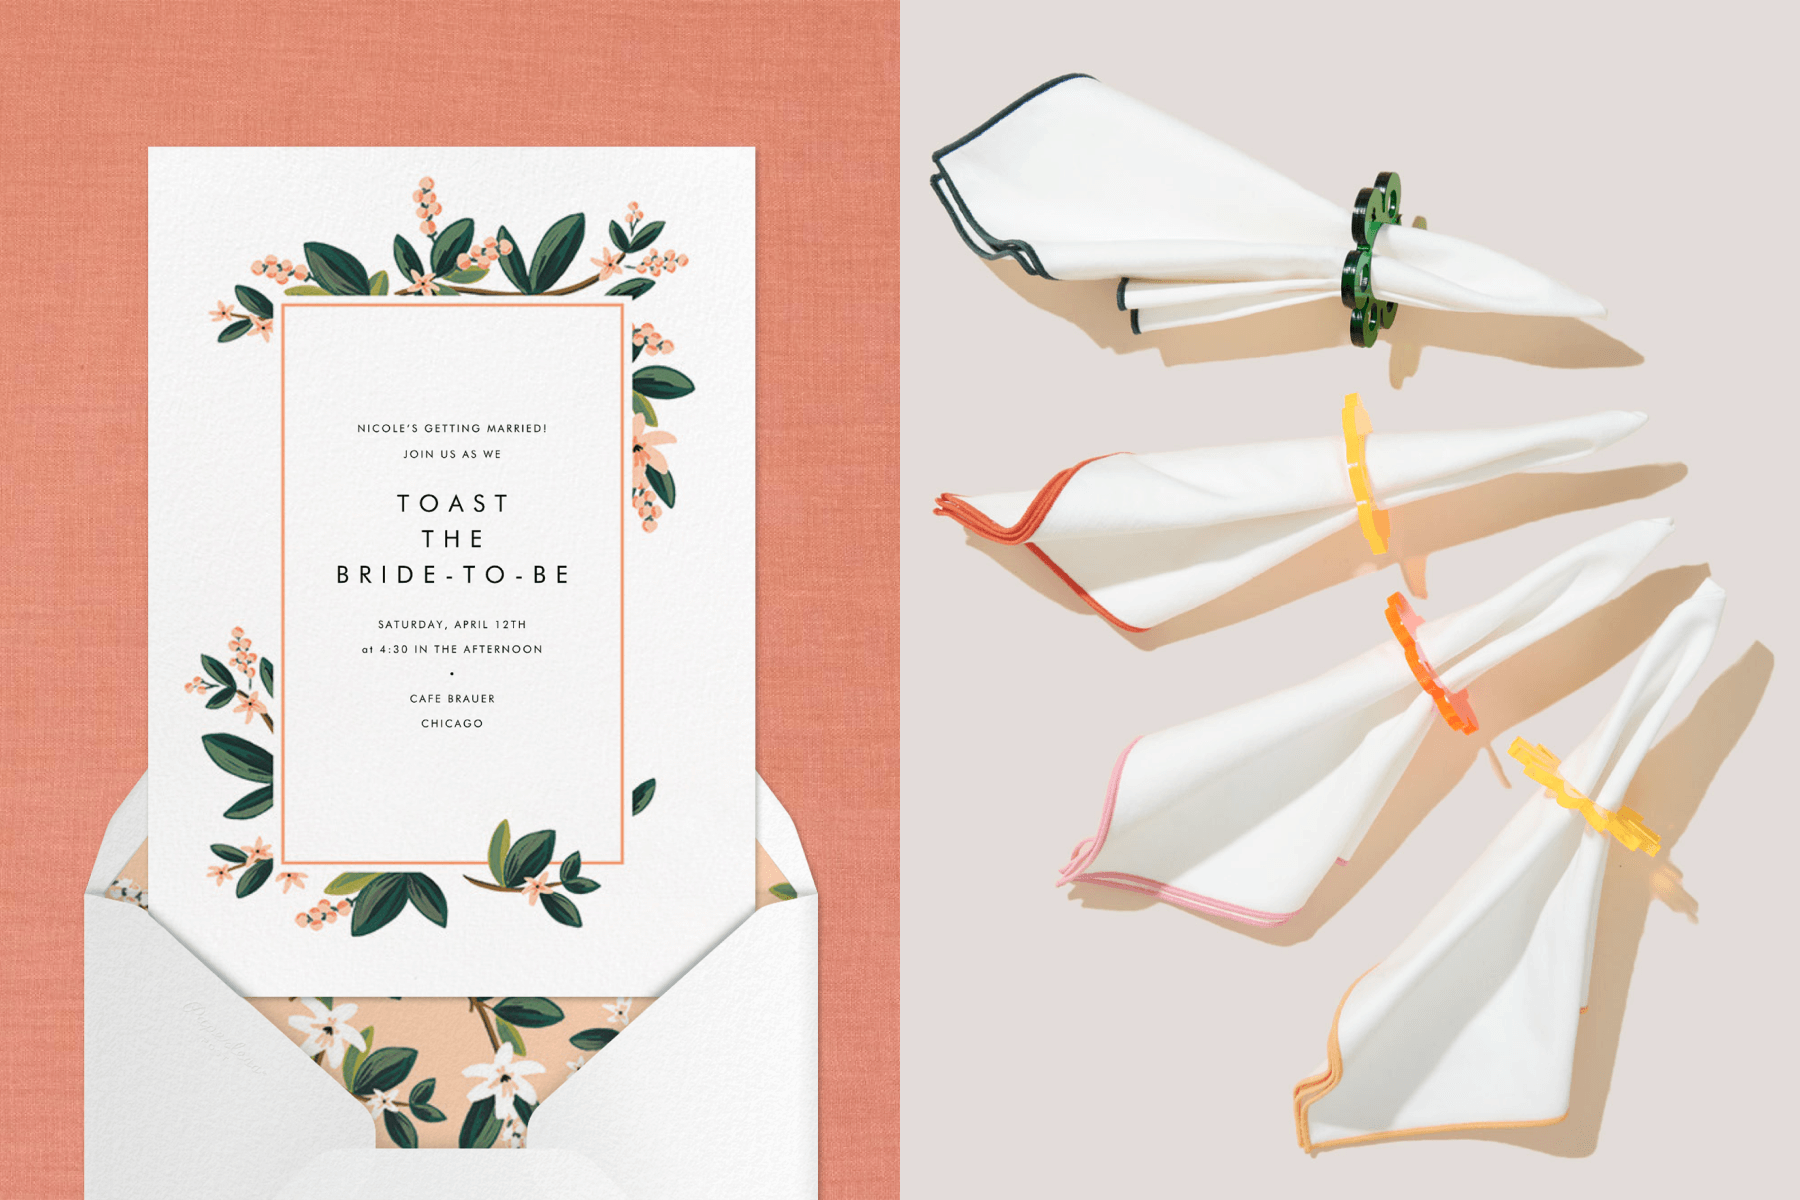 A bridal shower invitation with a pink border and illustrated leaves and pink flowers. Right: Four white cloth napkins with rainbow embroidered edges and colorful acrylic napkin rings.